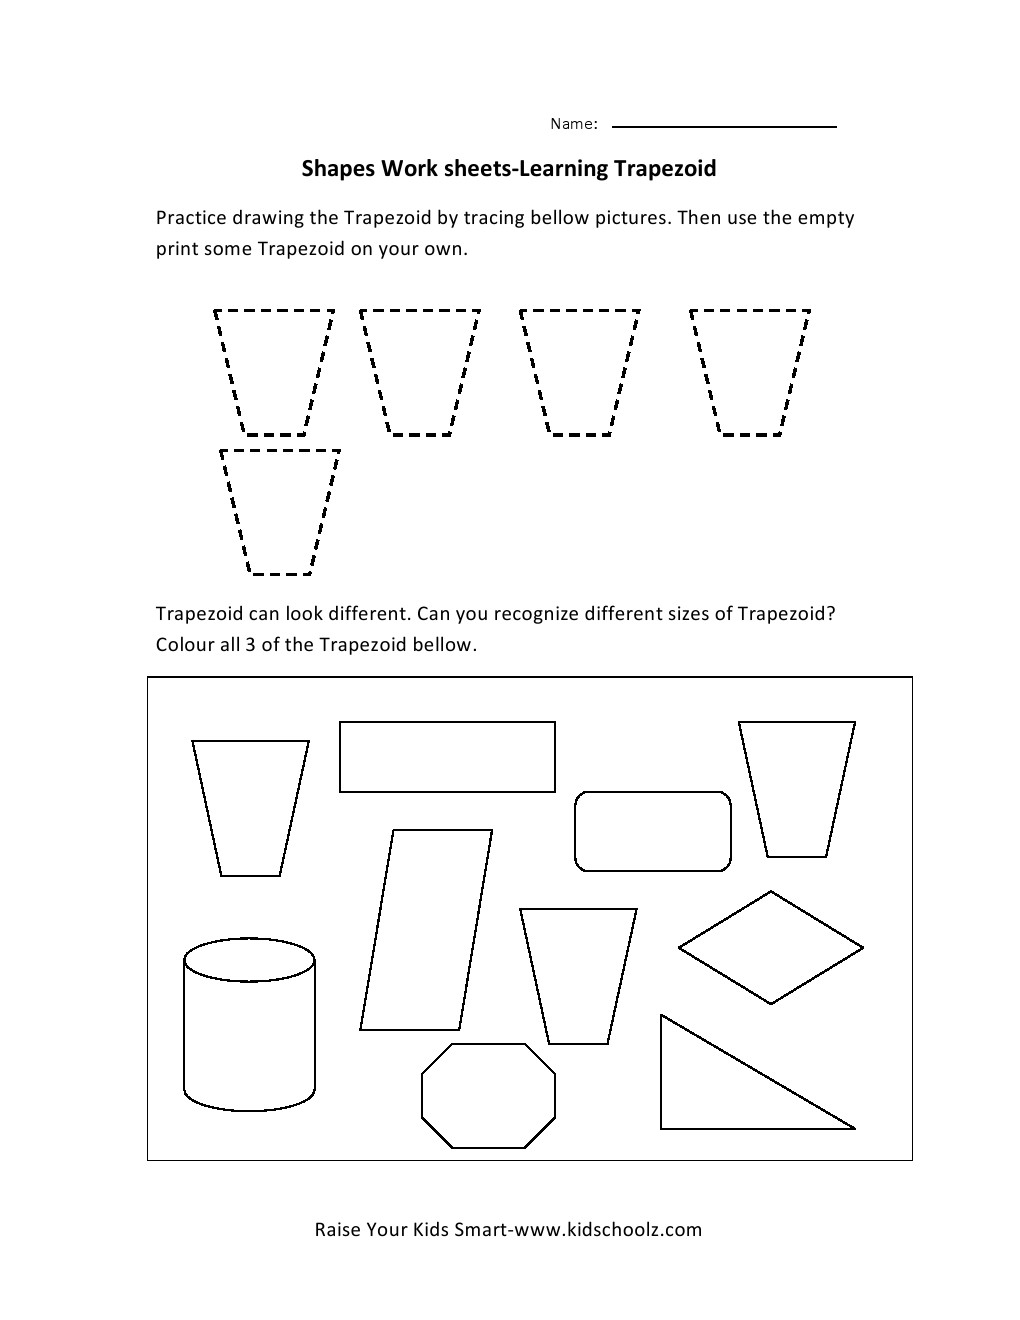 7-best-images-of-area-of-a-trapezoid-worksheet-trapezoid-area-and